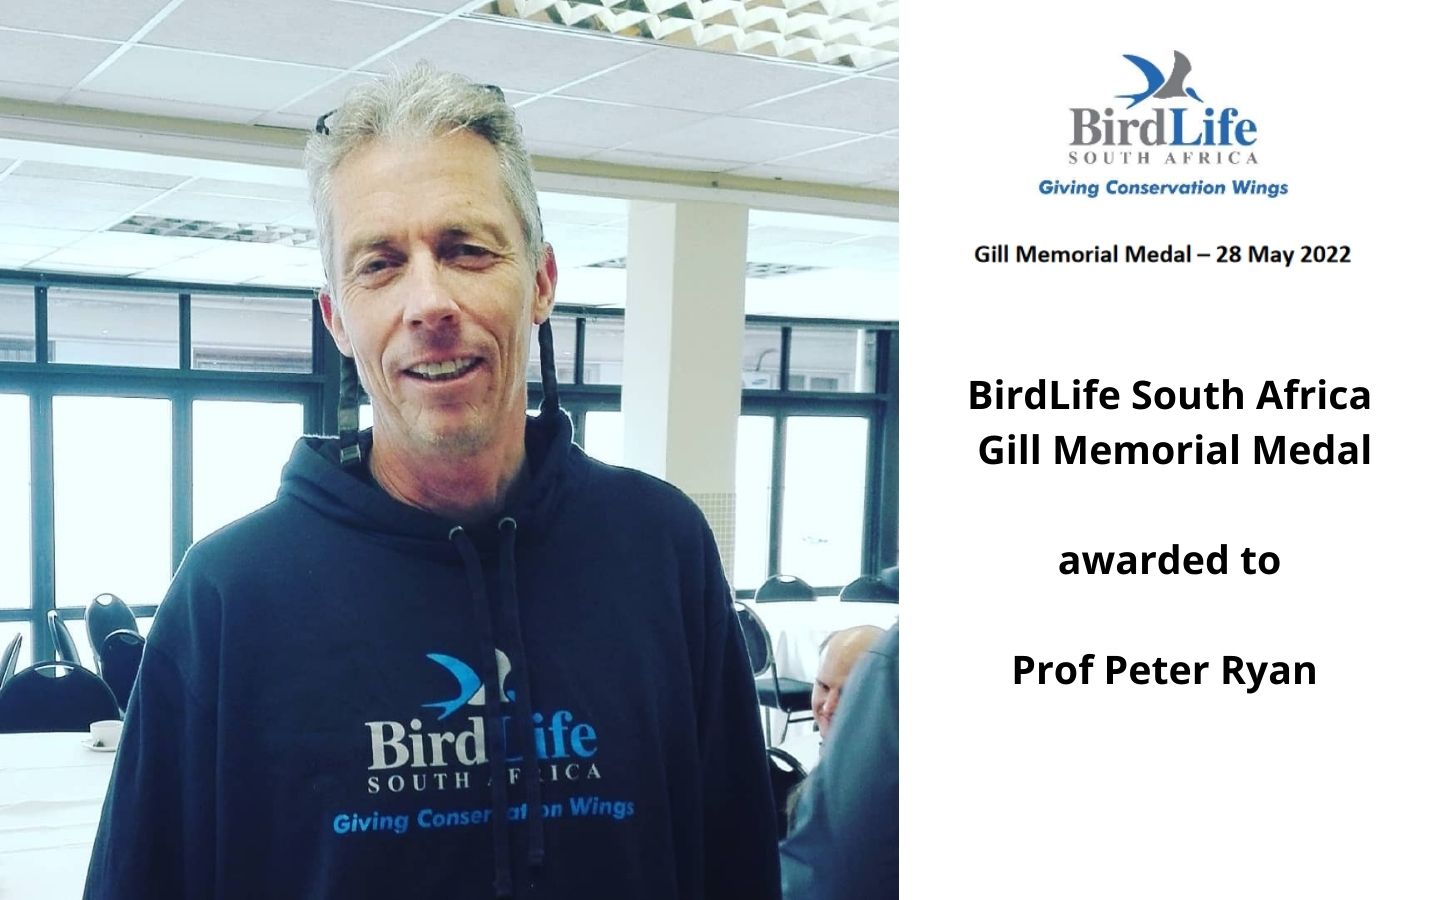 Prof Peter Ryan awarded with the Gill Memorial Medal